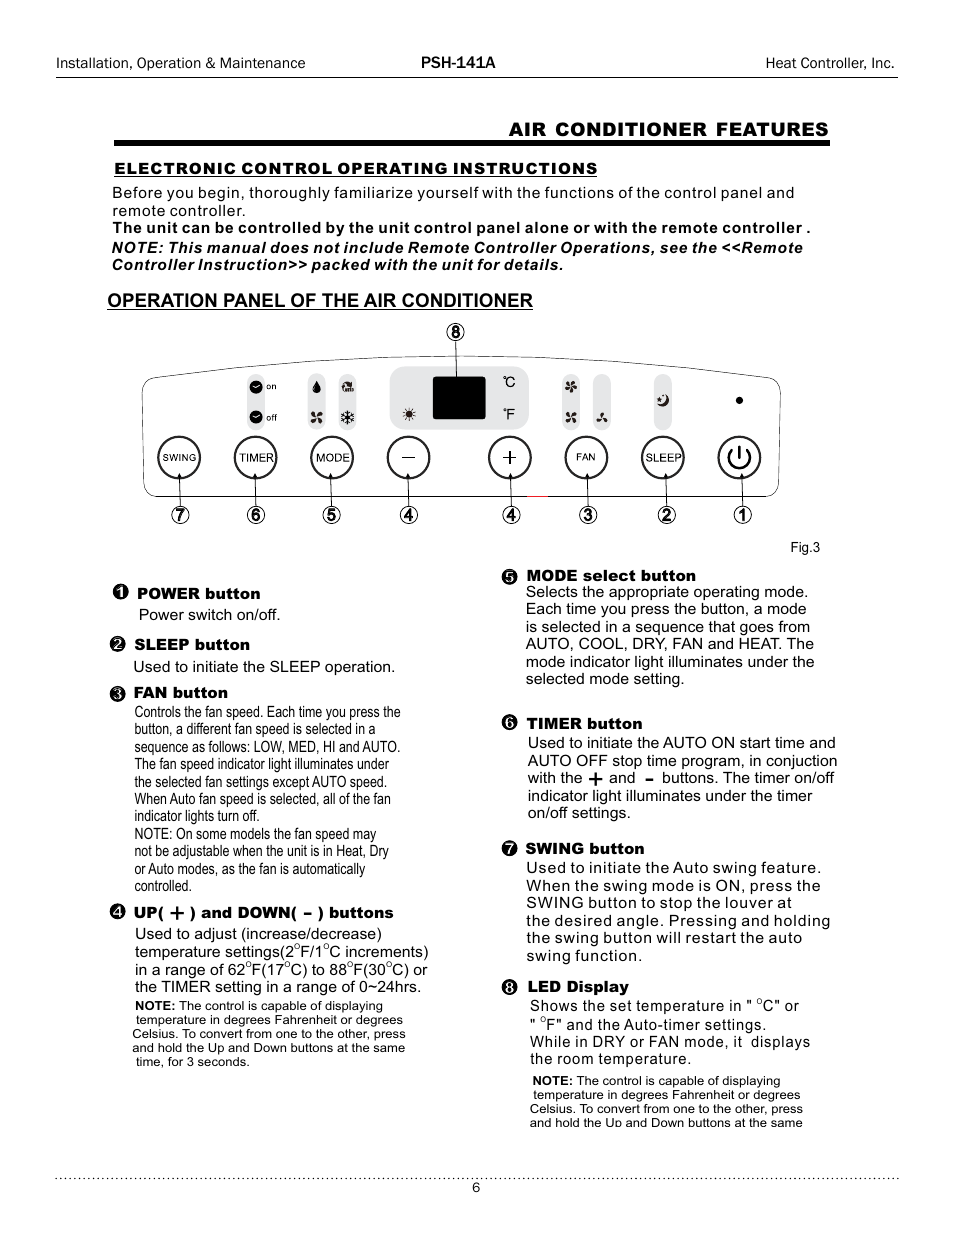 Operation panel of the air conditioner | Comfort-Aire PSH-141A User Manual | Page 6 / 16